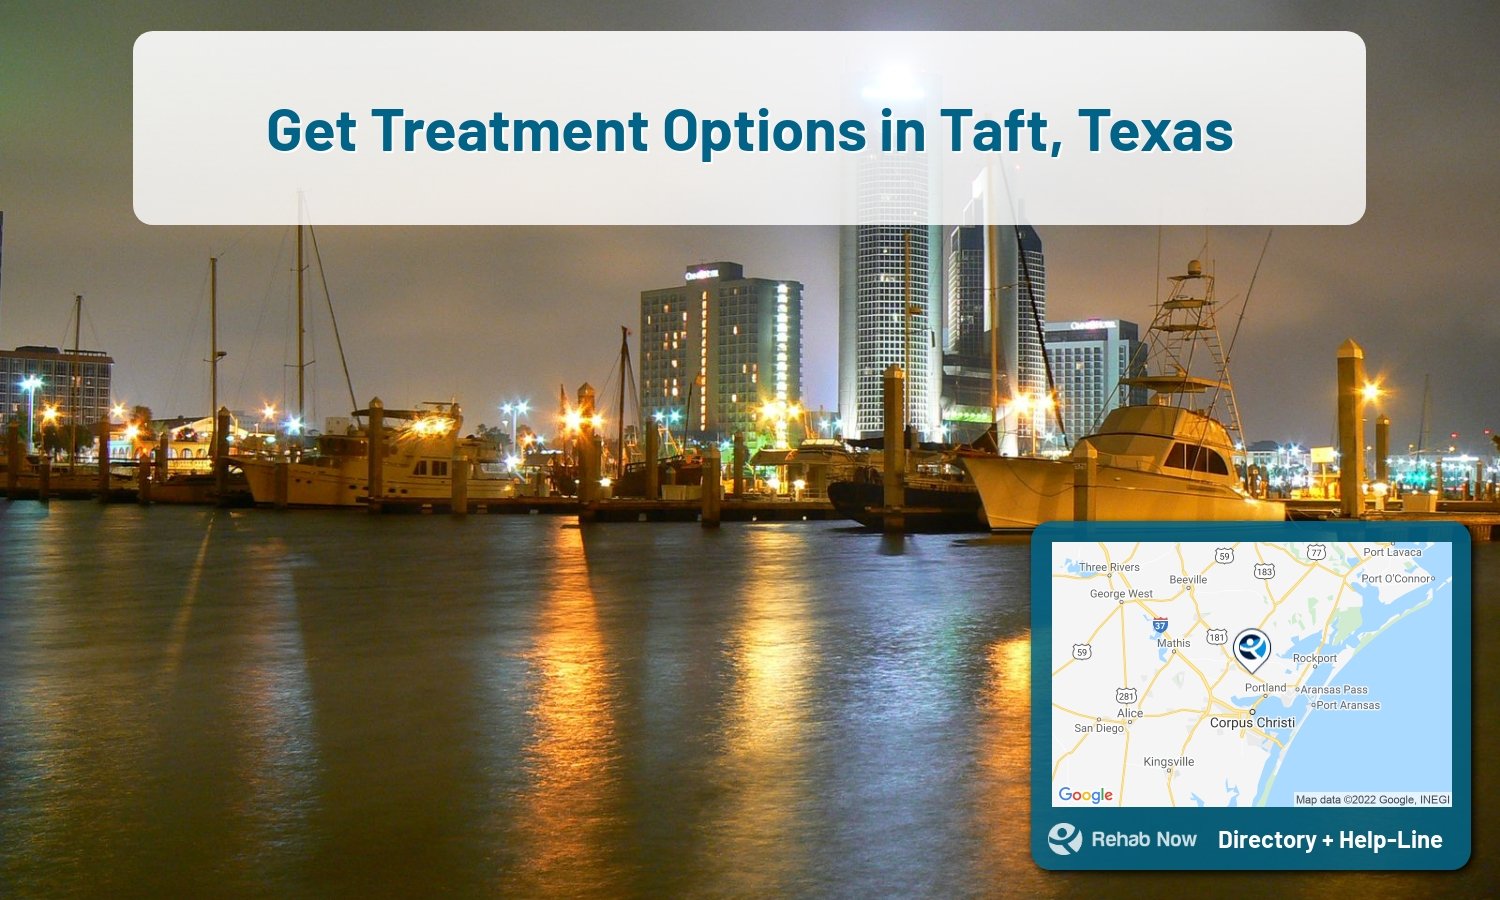 List of alcohol and drug treatment centers near you in Taft, Texas. Research certifications, programs, methods, pricing, and more.